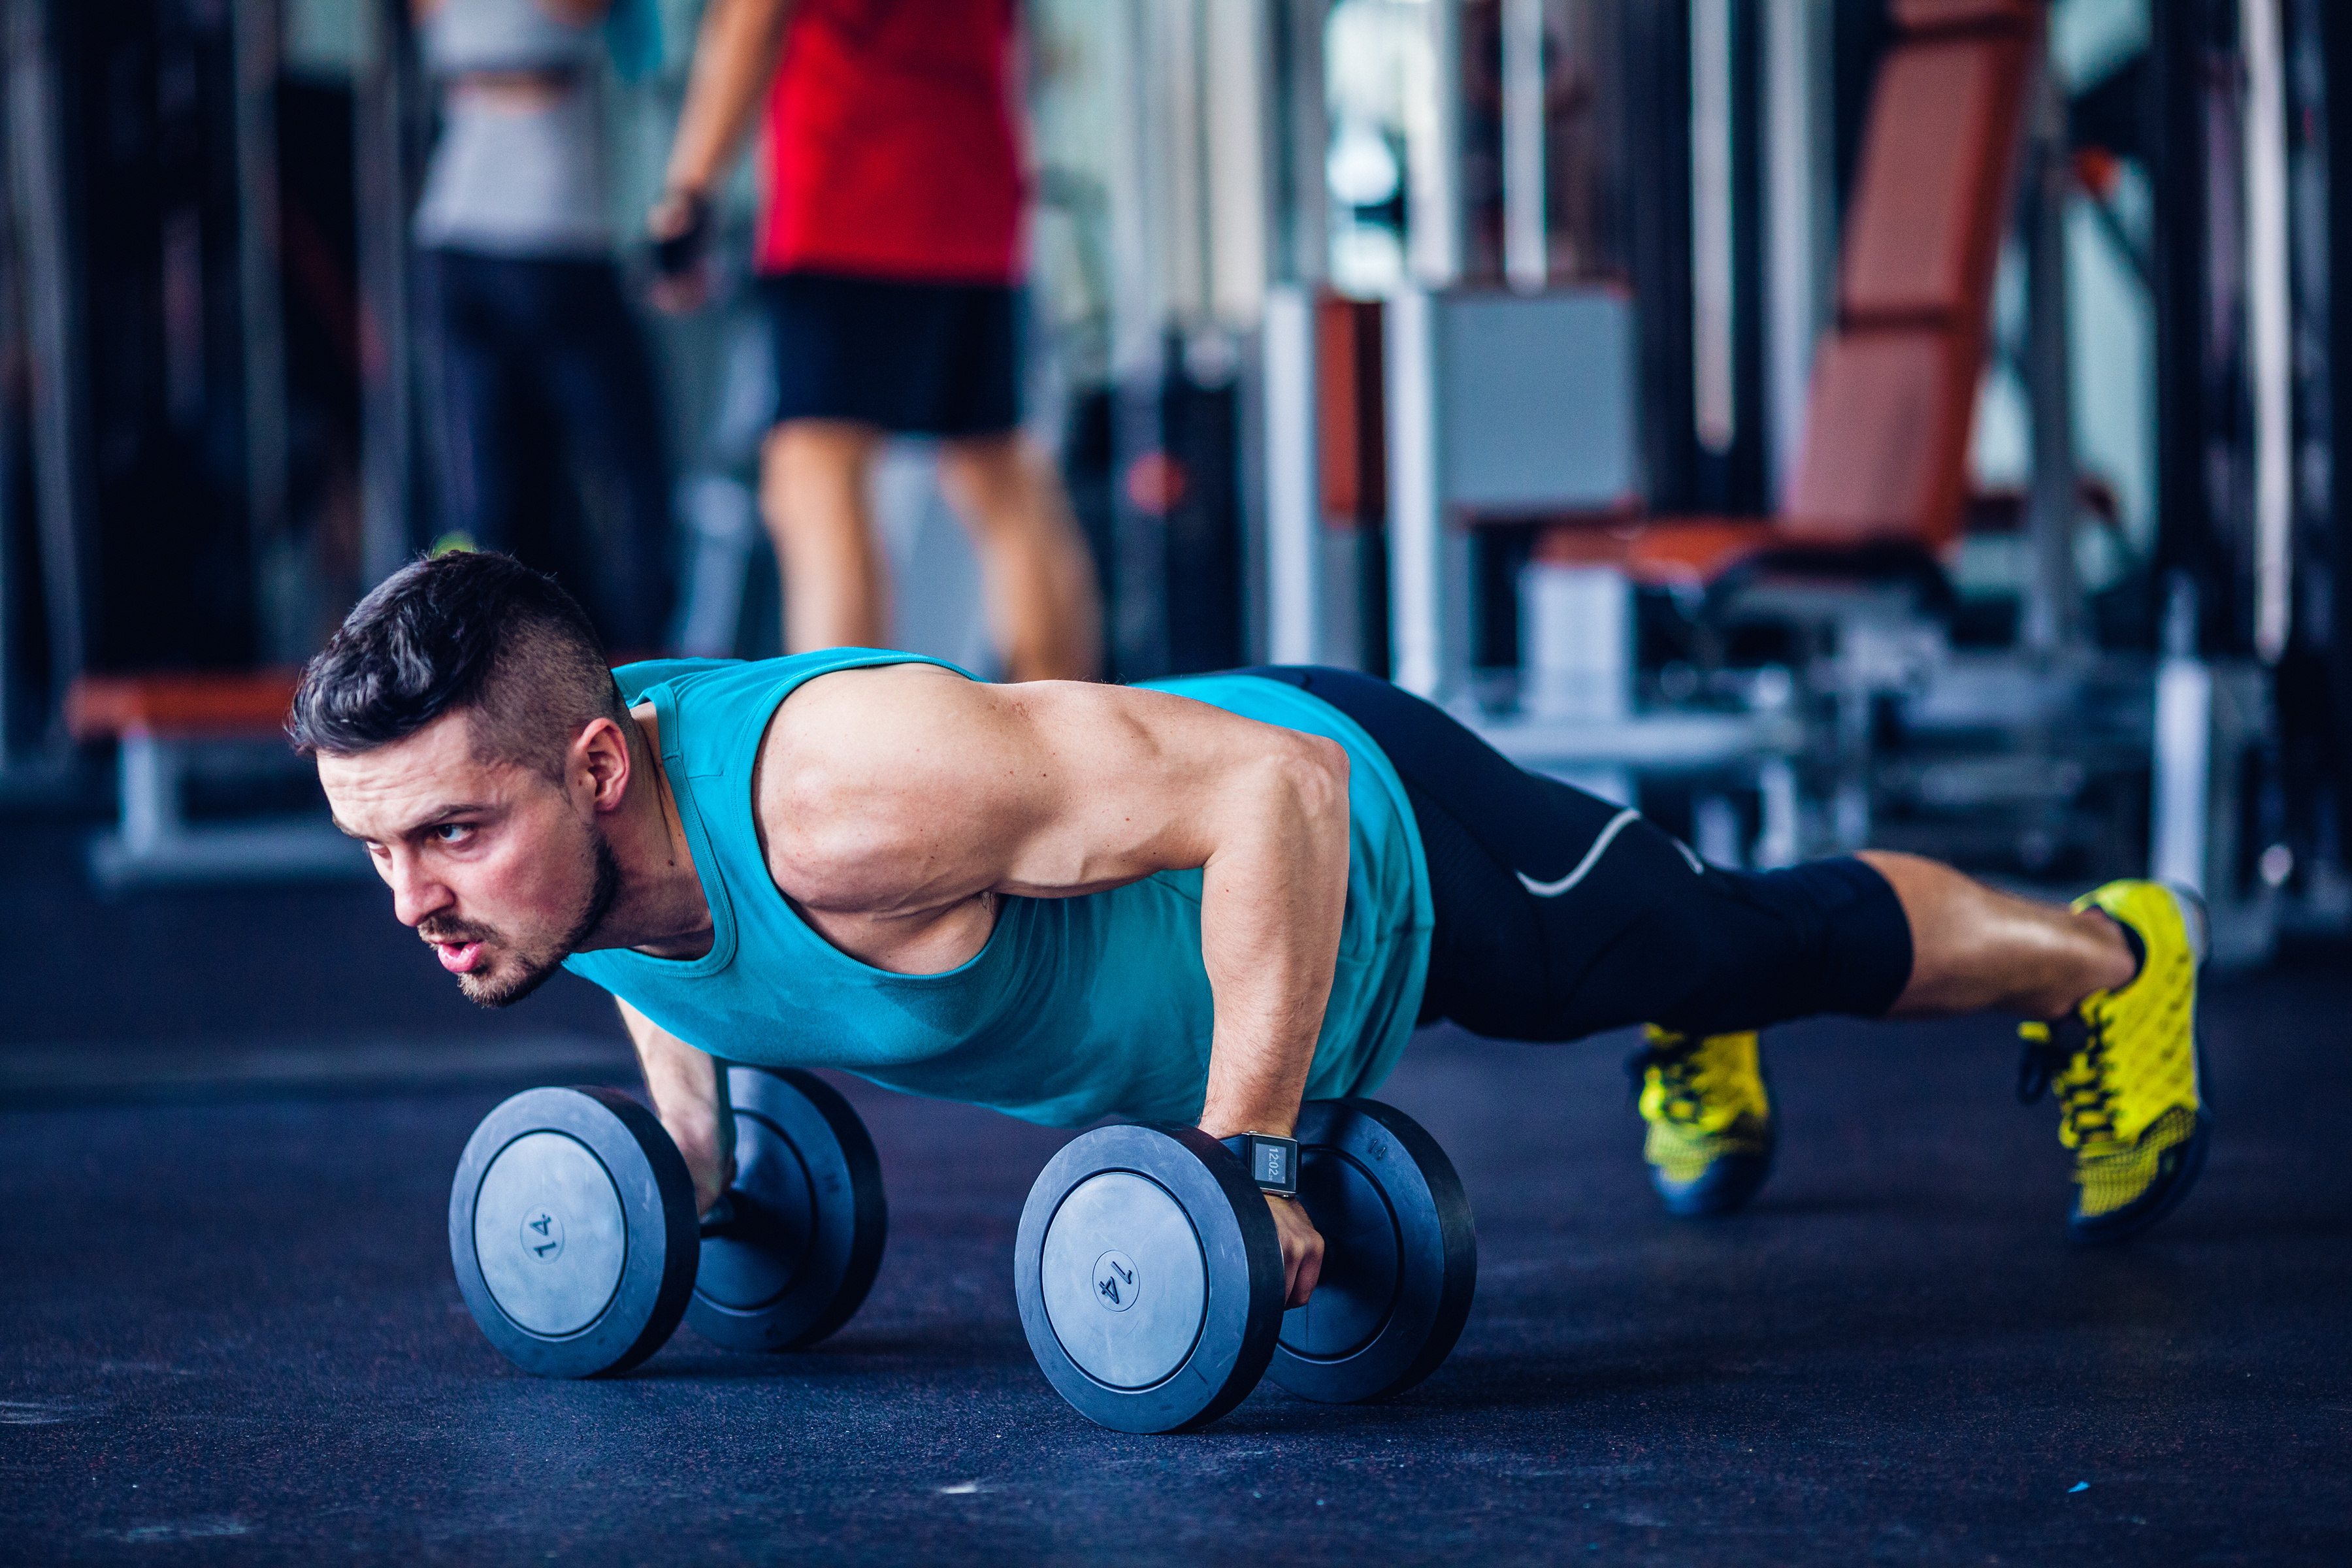 The top 5 benefits of strength training for the athlete